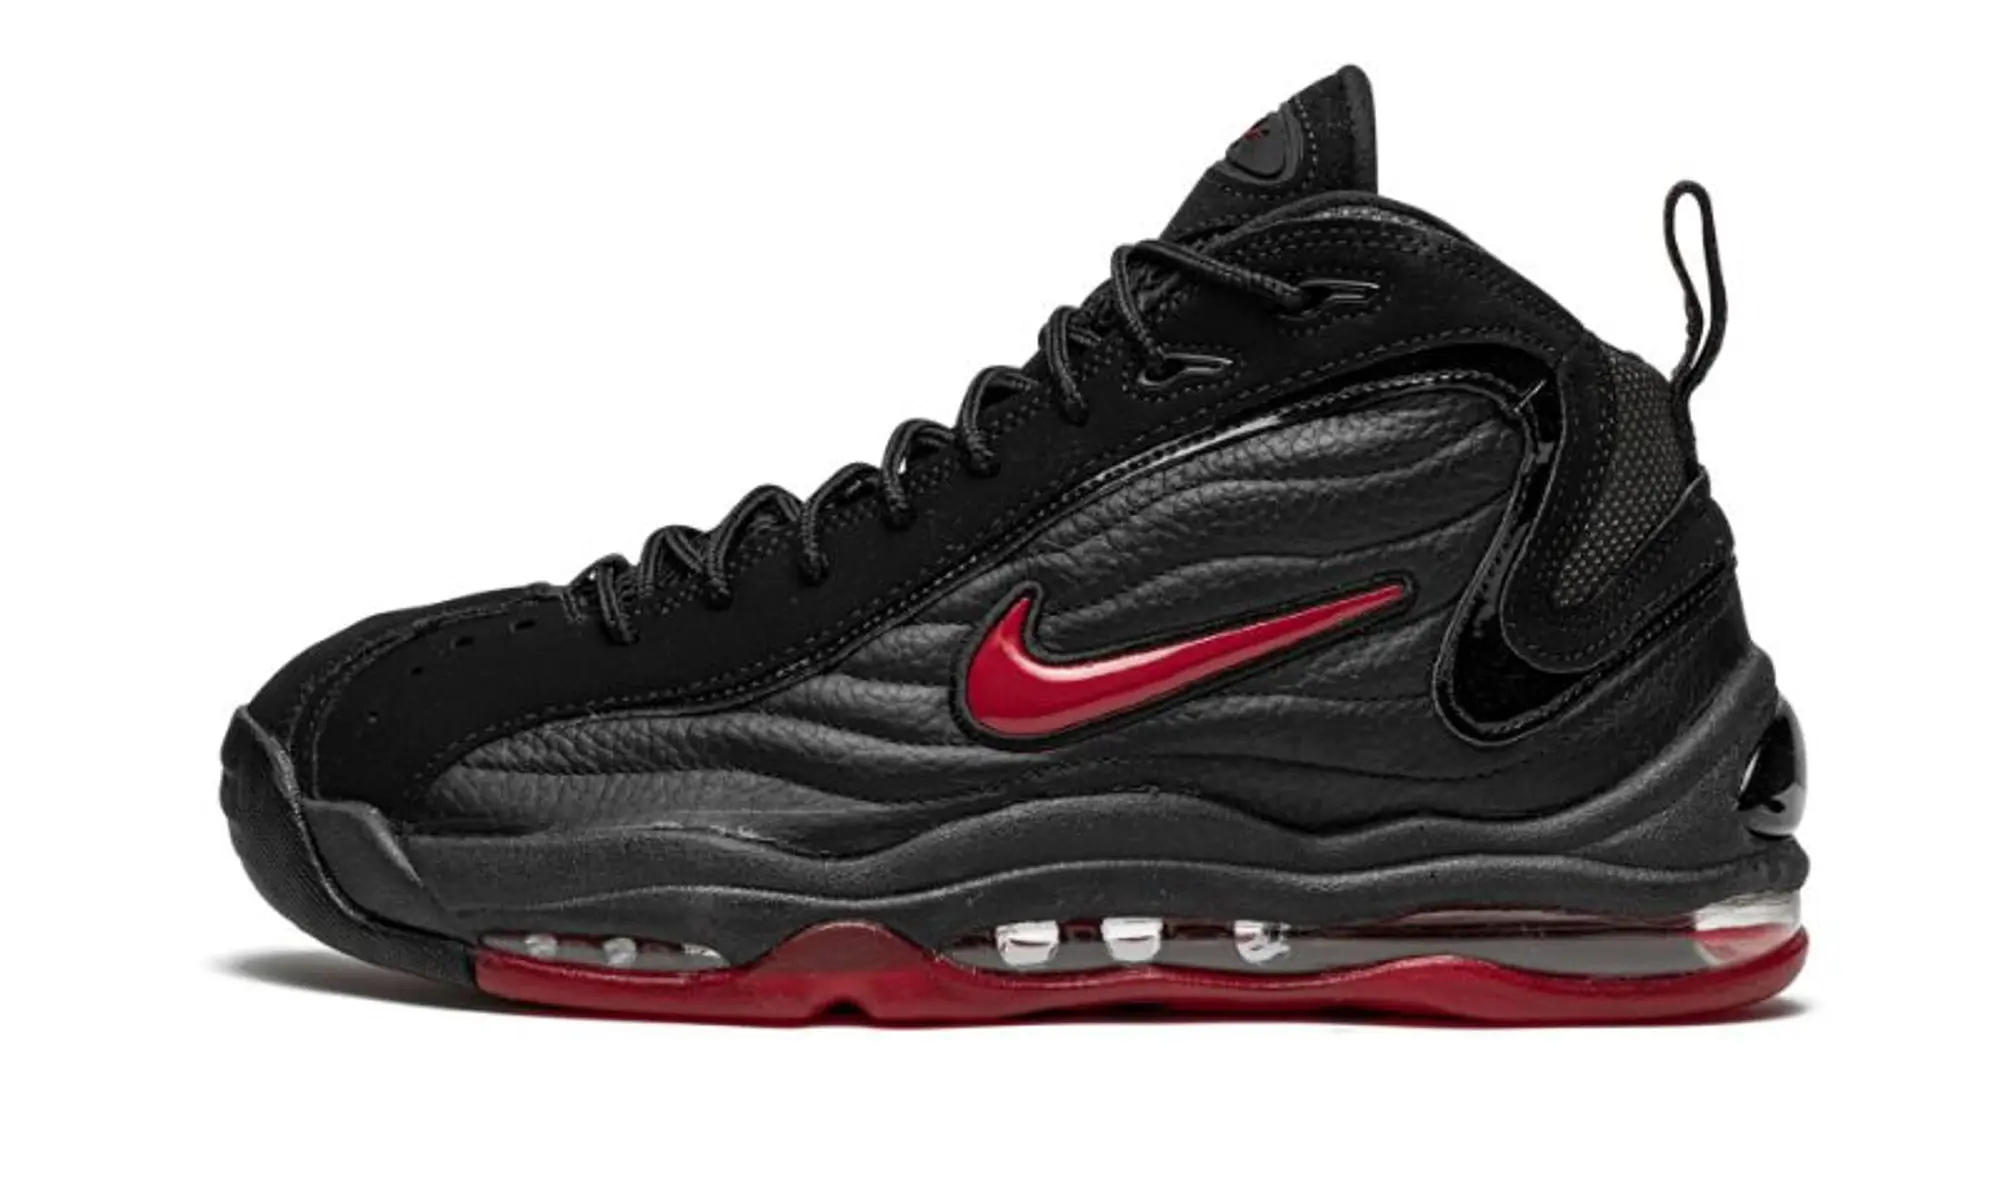 Nike Air Total Max Uptempo Bred Shoes